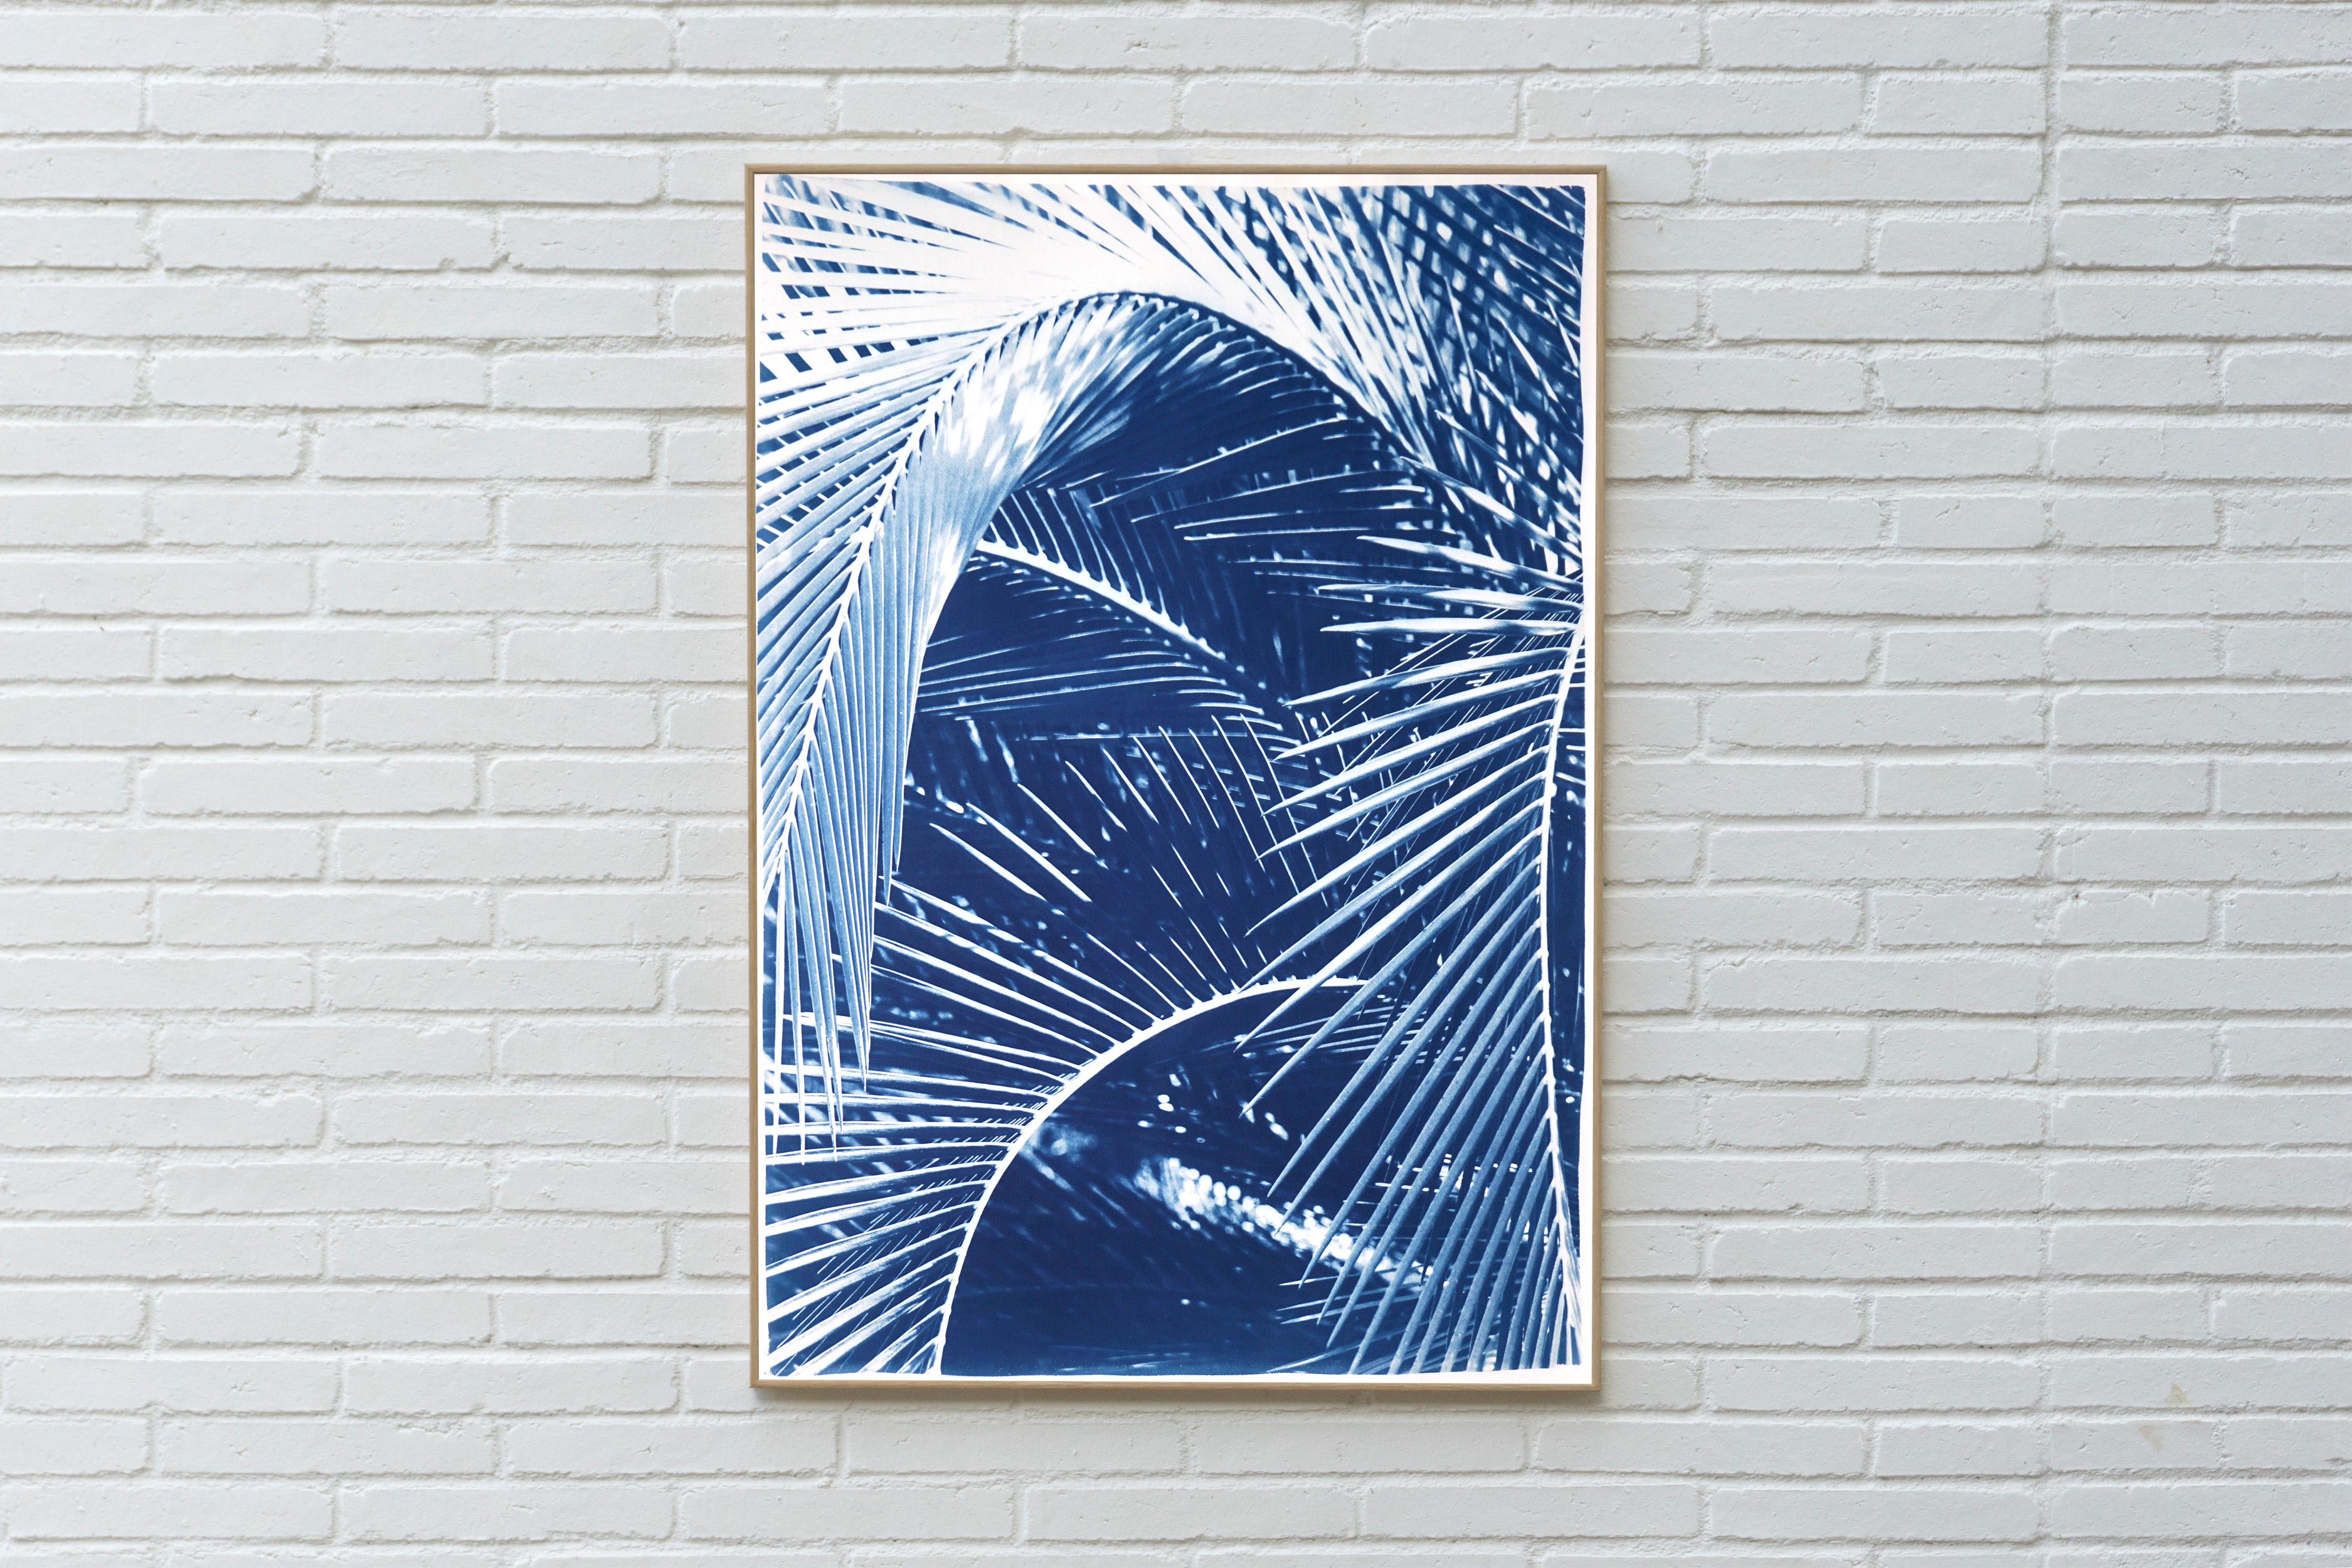 This is an exclusive handprinted limited edition cyanotype of a beautiful palm leave. 

Details:
+ Title: Tropical Palm Branches
+ Year: 2021
+ Edition Size: 20
+ Stamped and Certificate of Authenticity provided
+ Measurements : 70x100 cm (28x 40